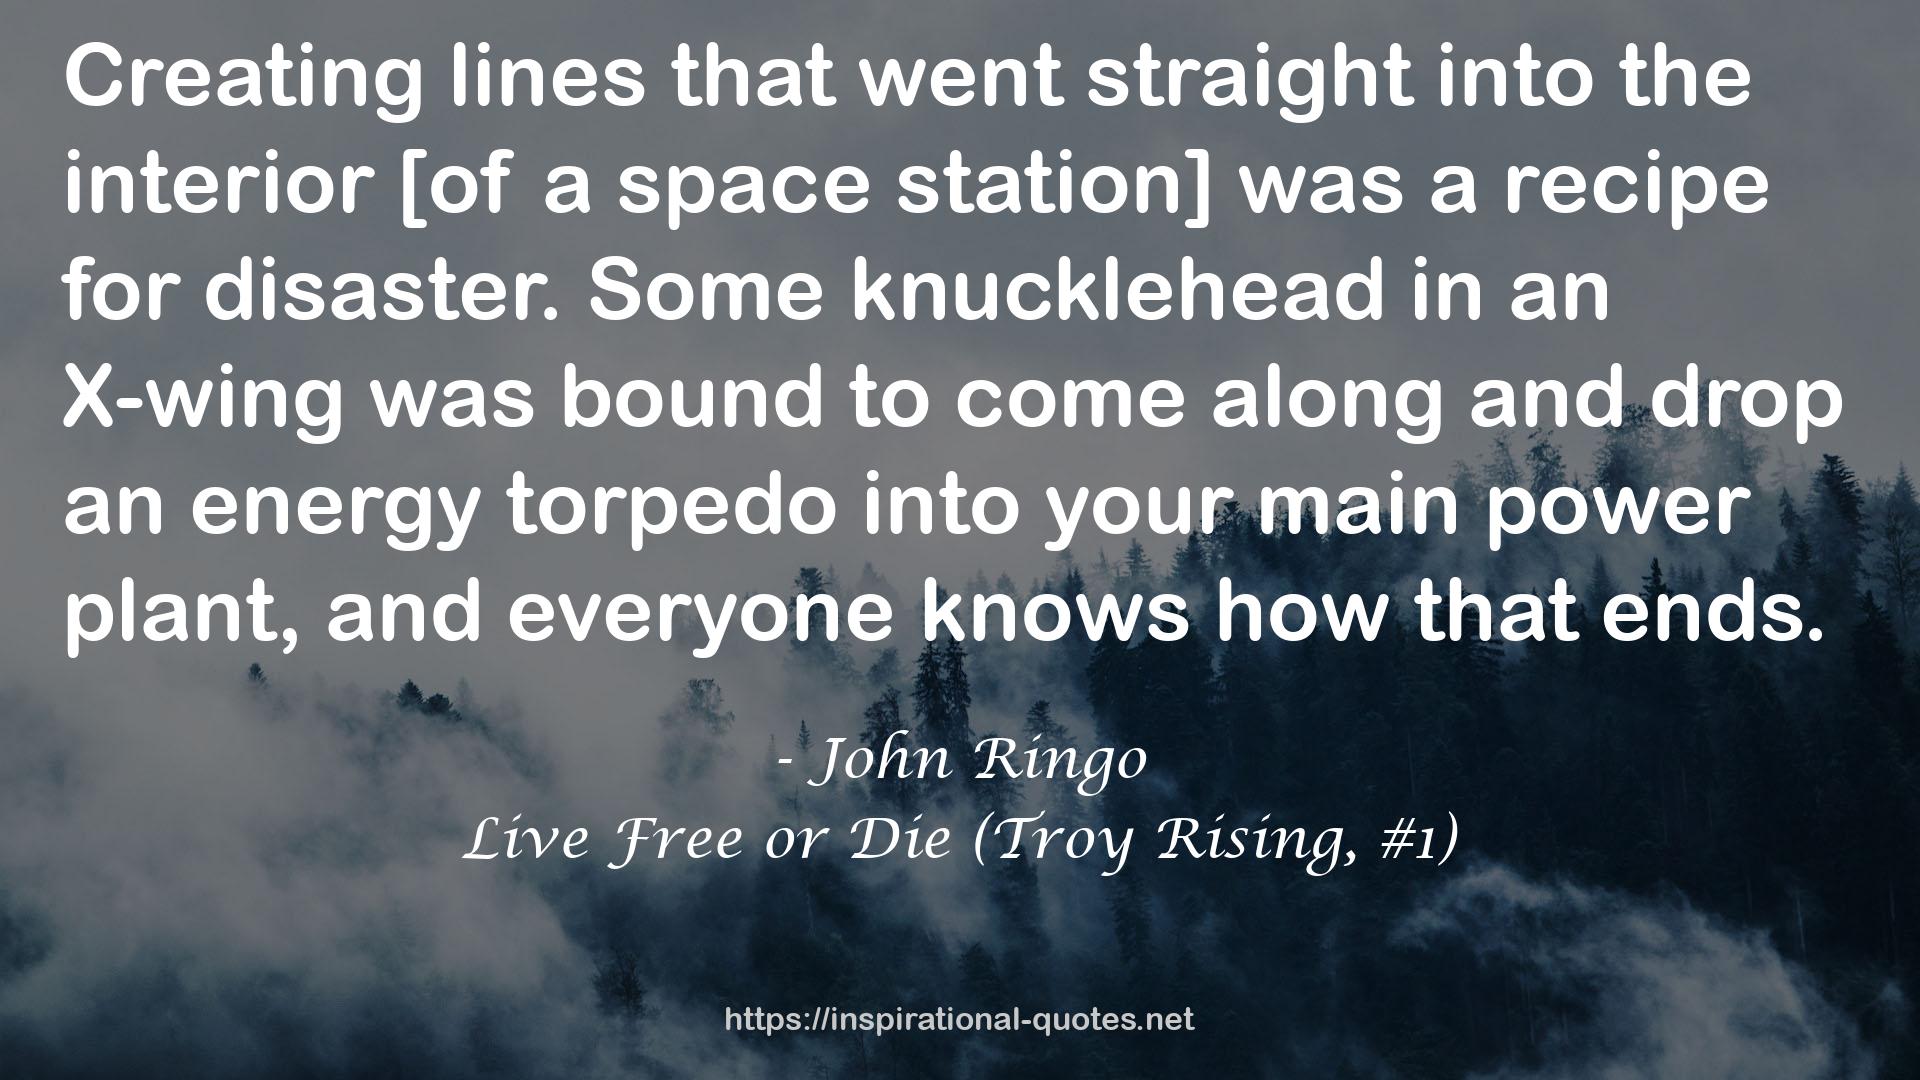 Live Free or Die (Troy Rising, #1) QUOTES